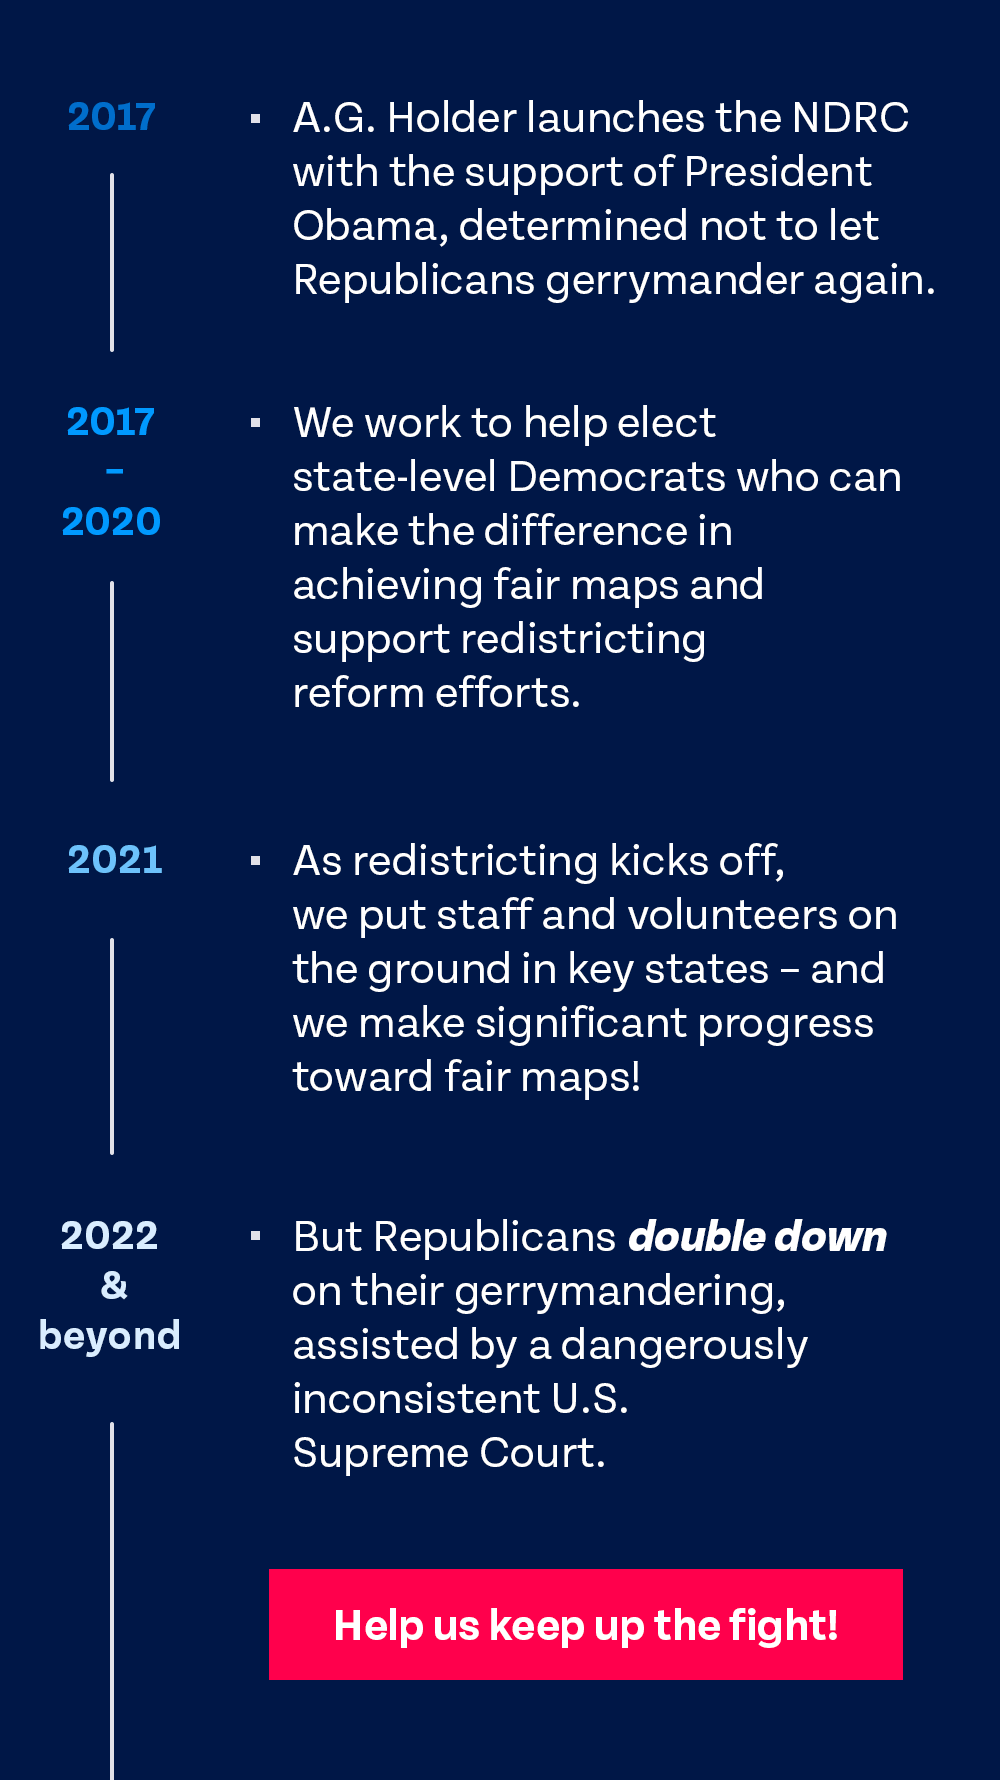 2017: A.G. Holder launches the NDRC with the support of President Obama, determined not to let Republicans gerrymander again. 2017-2020: We work to help elect state-level Democrats who can make the difference in achieving fair maps and support redistricting reform efforts. 2021: As redistricting kicks off, we put staff and volunteers on the ground in key states – and we make significant progress toward fair maps! 2022: But Republicans double down on their gerrymandering, assisted by a dangerously inconsistent U.S. Supreme Court. Help us keep up the fight!